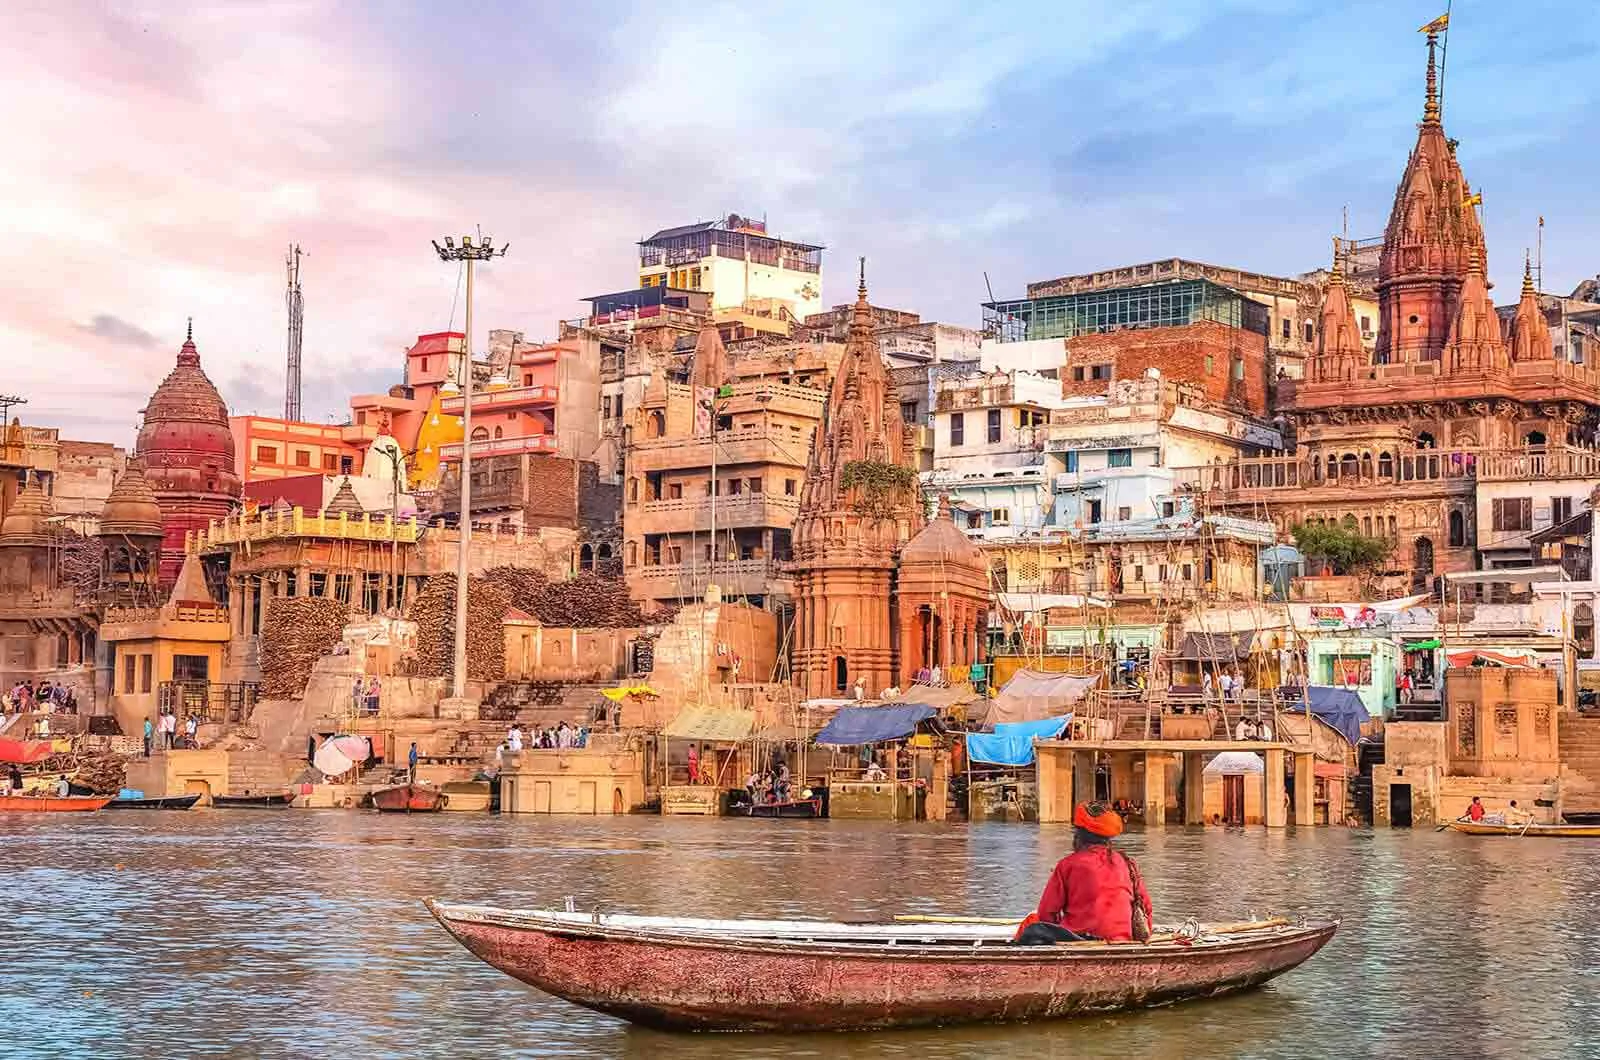 An Indian man on a boat in a river in Varanasi City, India. Concept of English to Hindi translation.